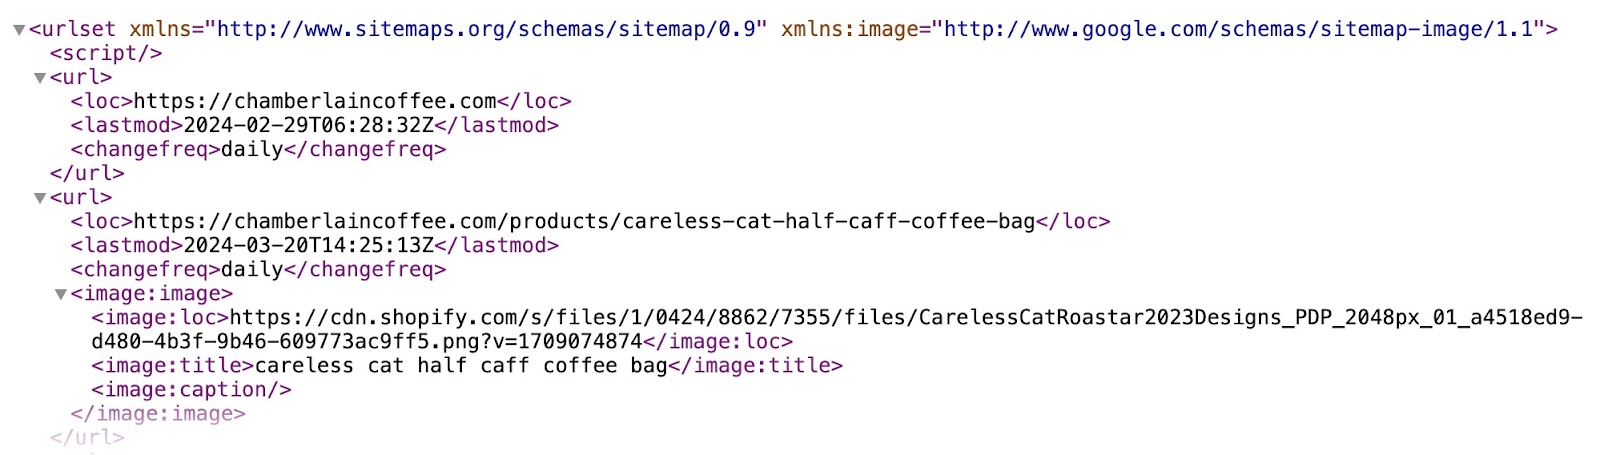 Nested xml tags that include data about various URLs on a coffee website